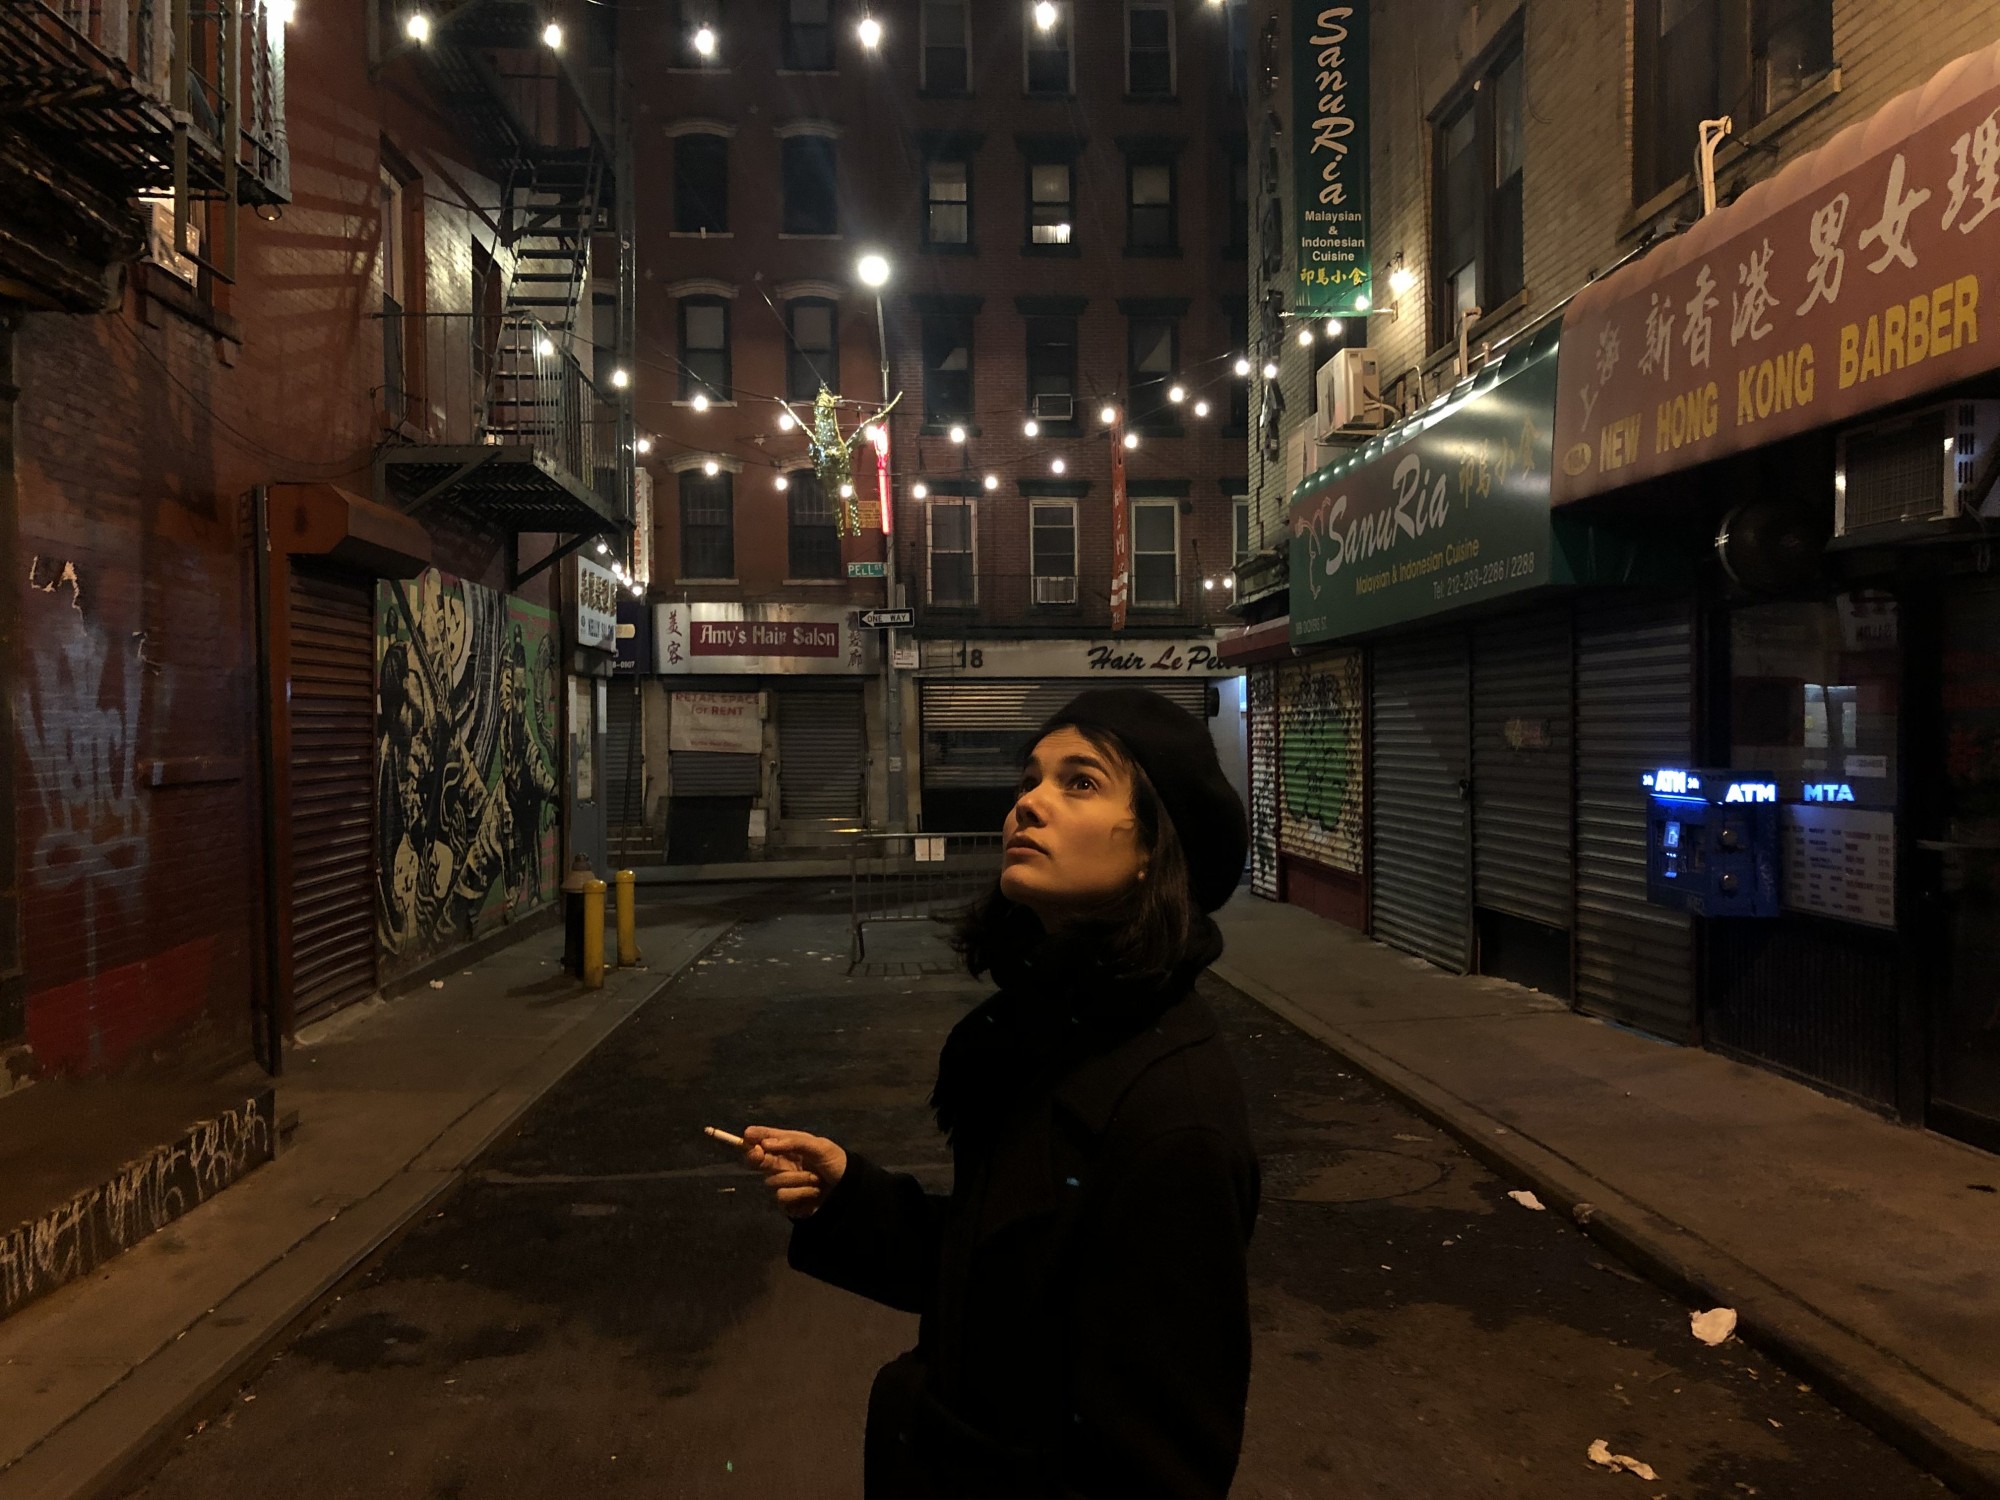 Alisha Mascarenhas stands in the middle of a deserted nighttime street in Manhattan, smoking a cigarette and looking up at the lights that hang between the buildings